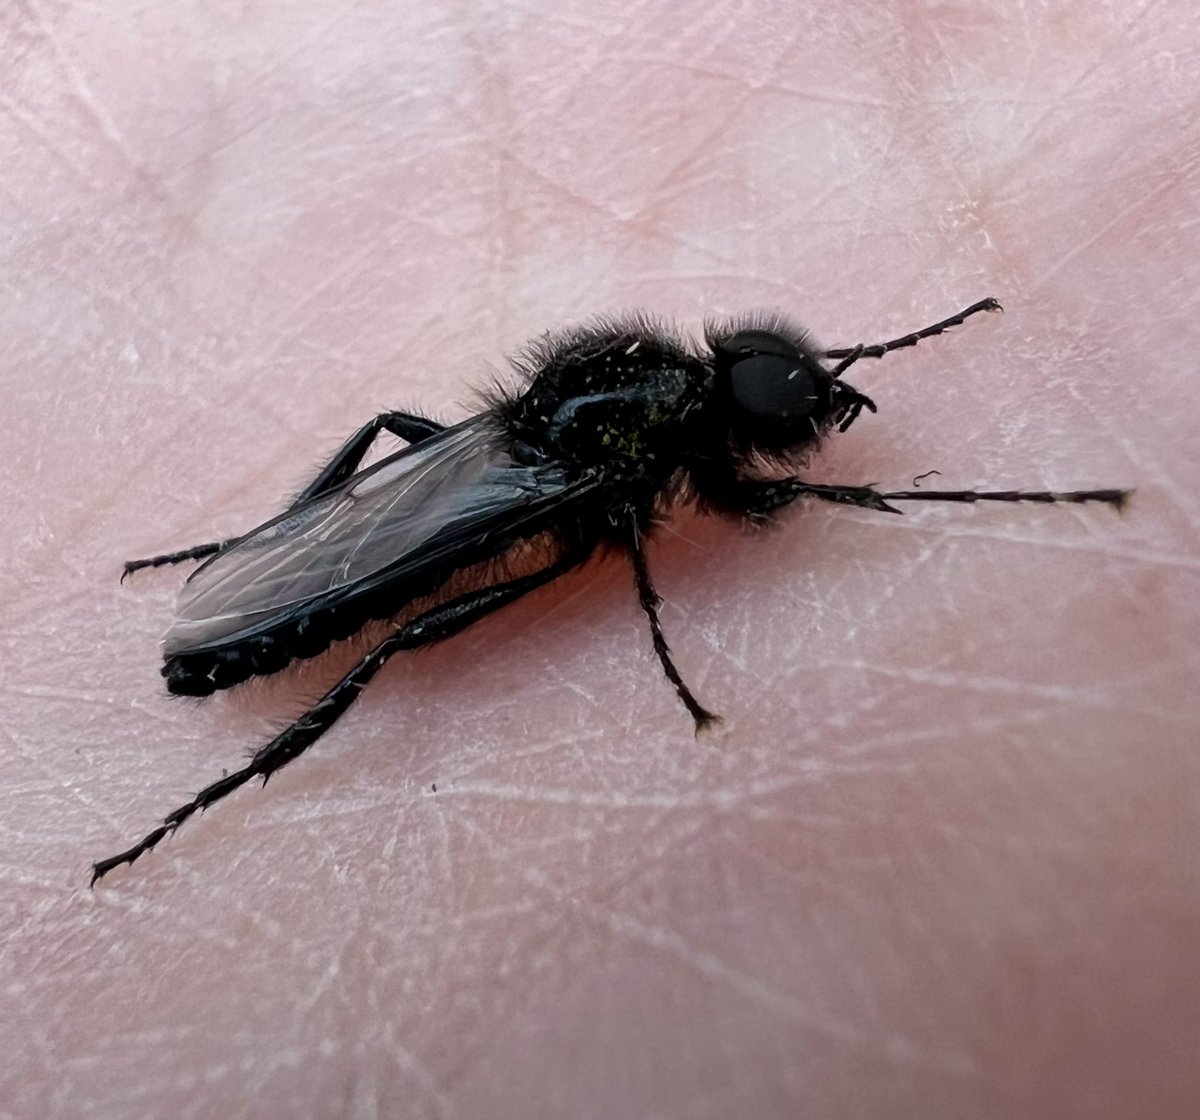 Hawthorn fly spotted last week so way earlier than it’s expected 25th April - St Marks Day 😬 (Bibio marci or St. Mark's fly) #fly #WildWebsWednesday @flygirlNHM